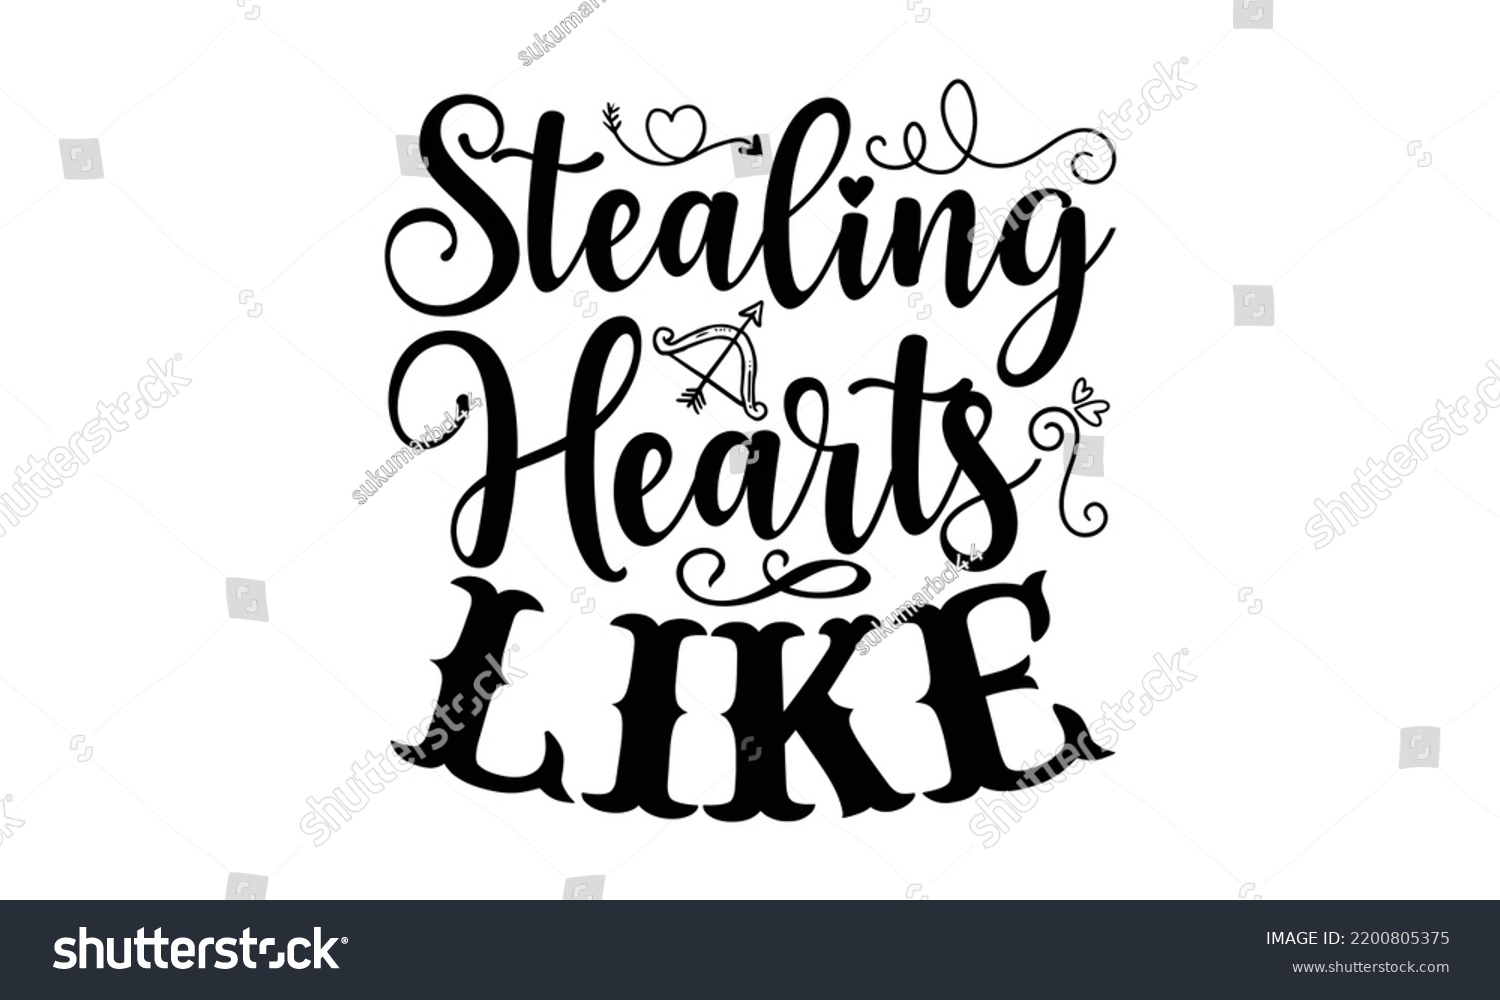 SVG of Stealing Hearts Like - Valentine's Day t shirt design, Hand drawn lettering phrase, calligraphy vector illustration, eps, svg isolated Files for Cutting svg